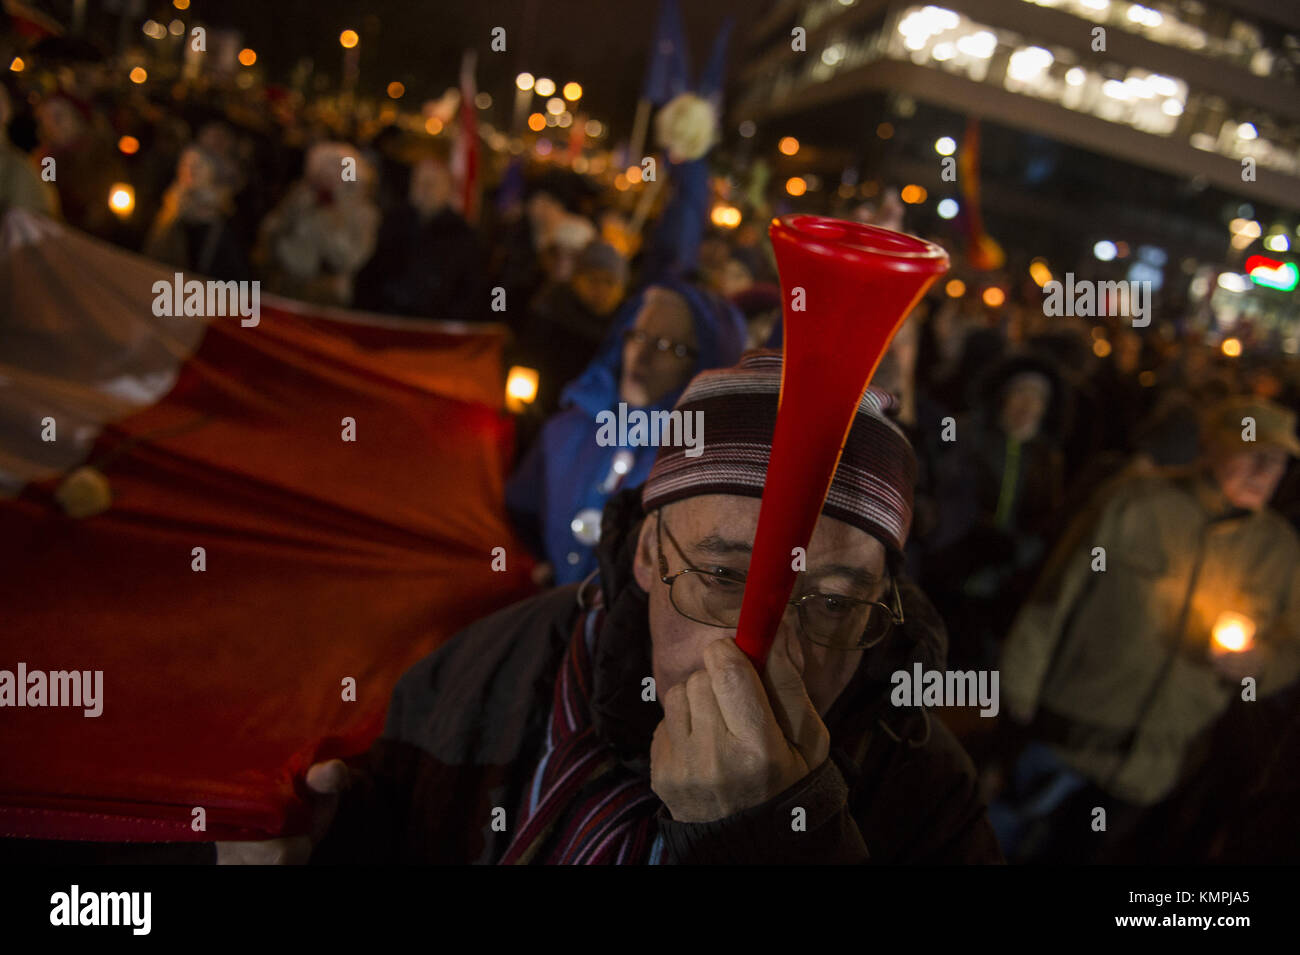 Krakow, Poland. 8th Dec, 2017. People seen gathering in front of Krakow Court to protest against the new judicial reforms. Today, The Polish parliament approved the government proposals to hand the ruling Law and Justice party (PiS) total control of judicial appointments and the supreme court. Credit: Omar Marques/SOPA/ZUMA Wire/Alamy Live News Stock Photo